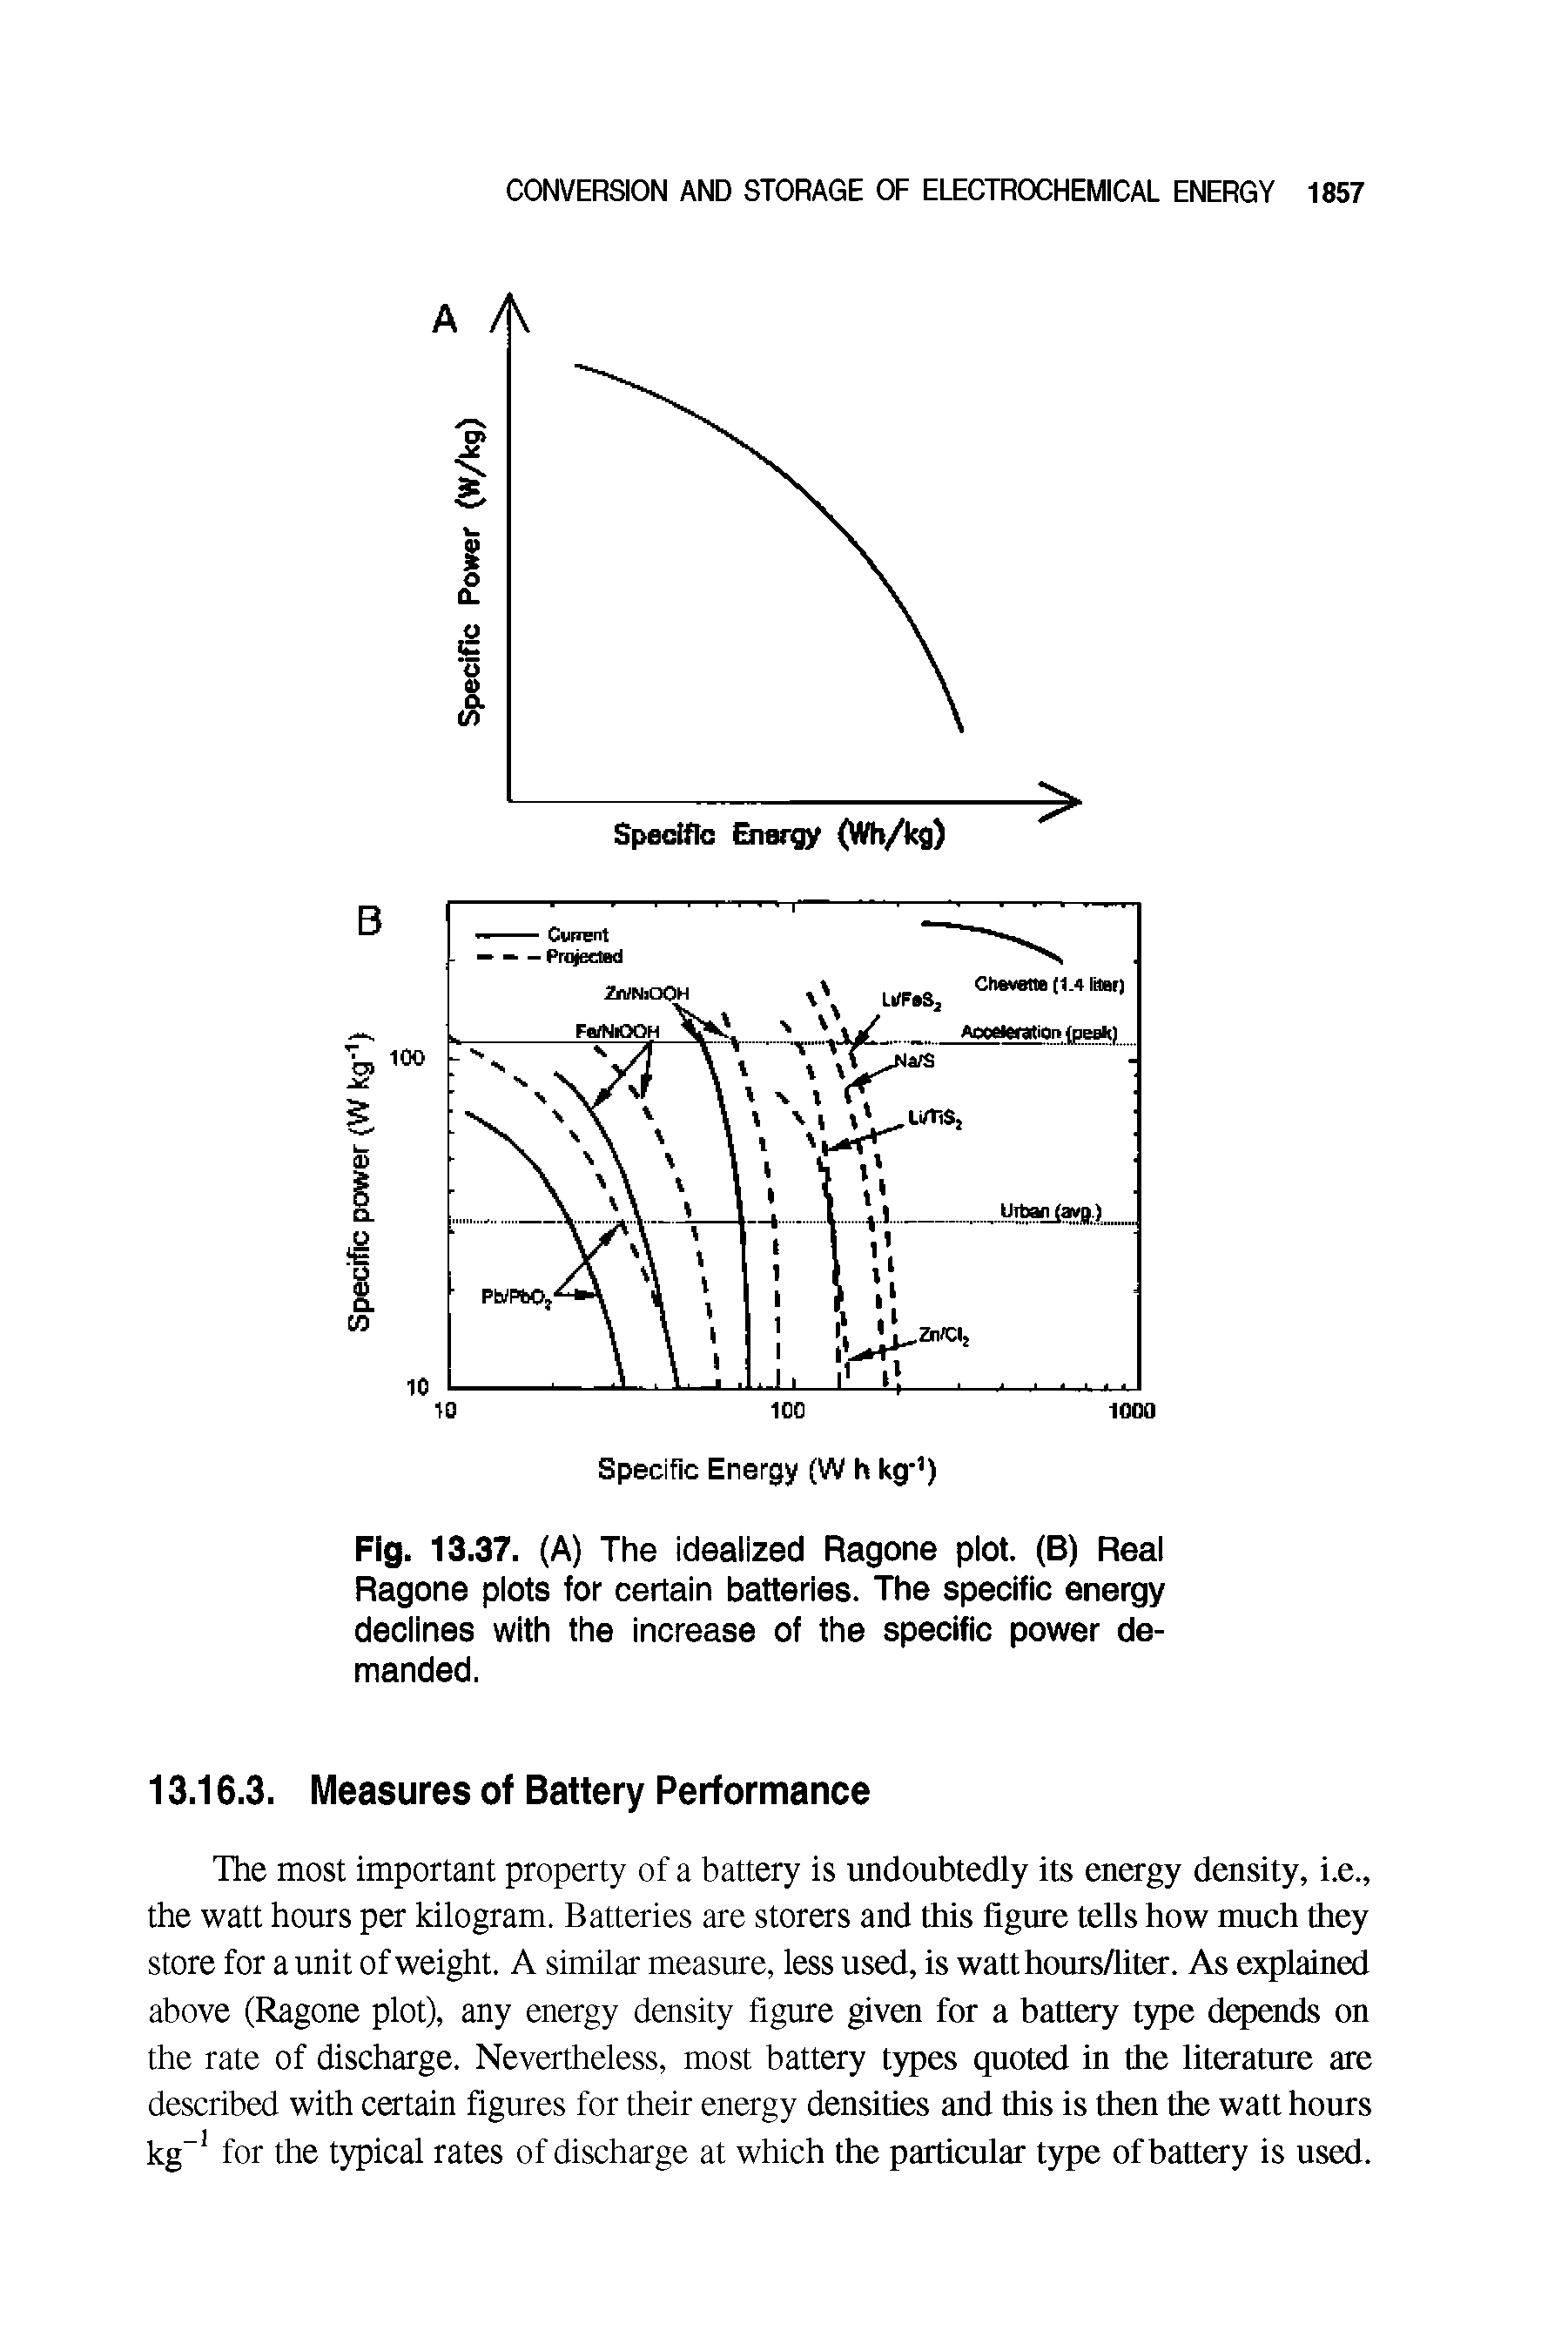 Fig. 13.37. (A) The idealized Ragone plot. (B) Real Ragone plots for certain batteries. The specific energy declines with the increase of the specific power demanded.